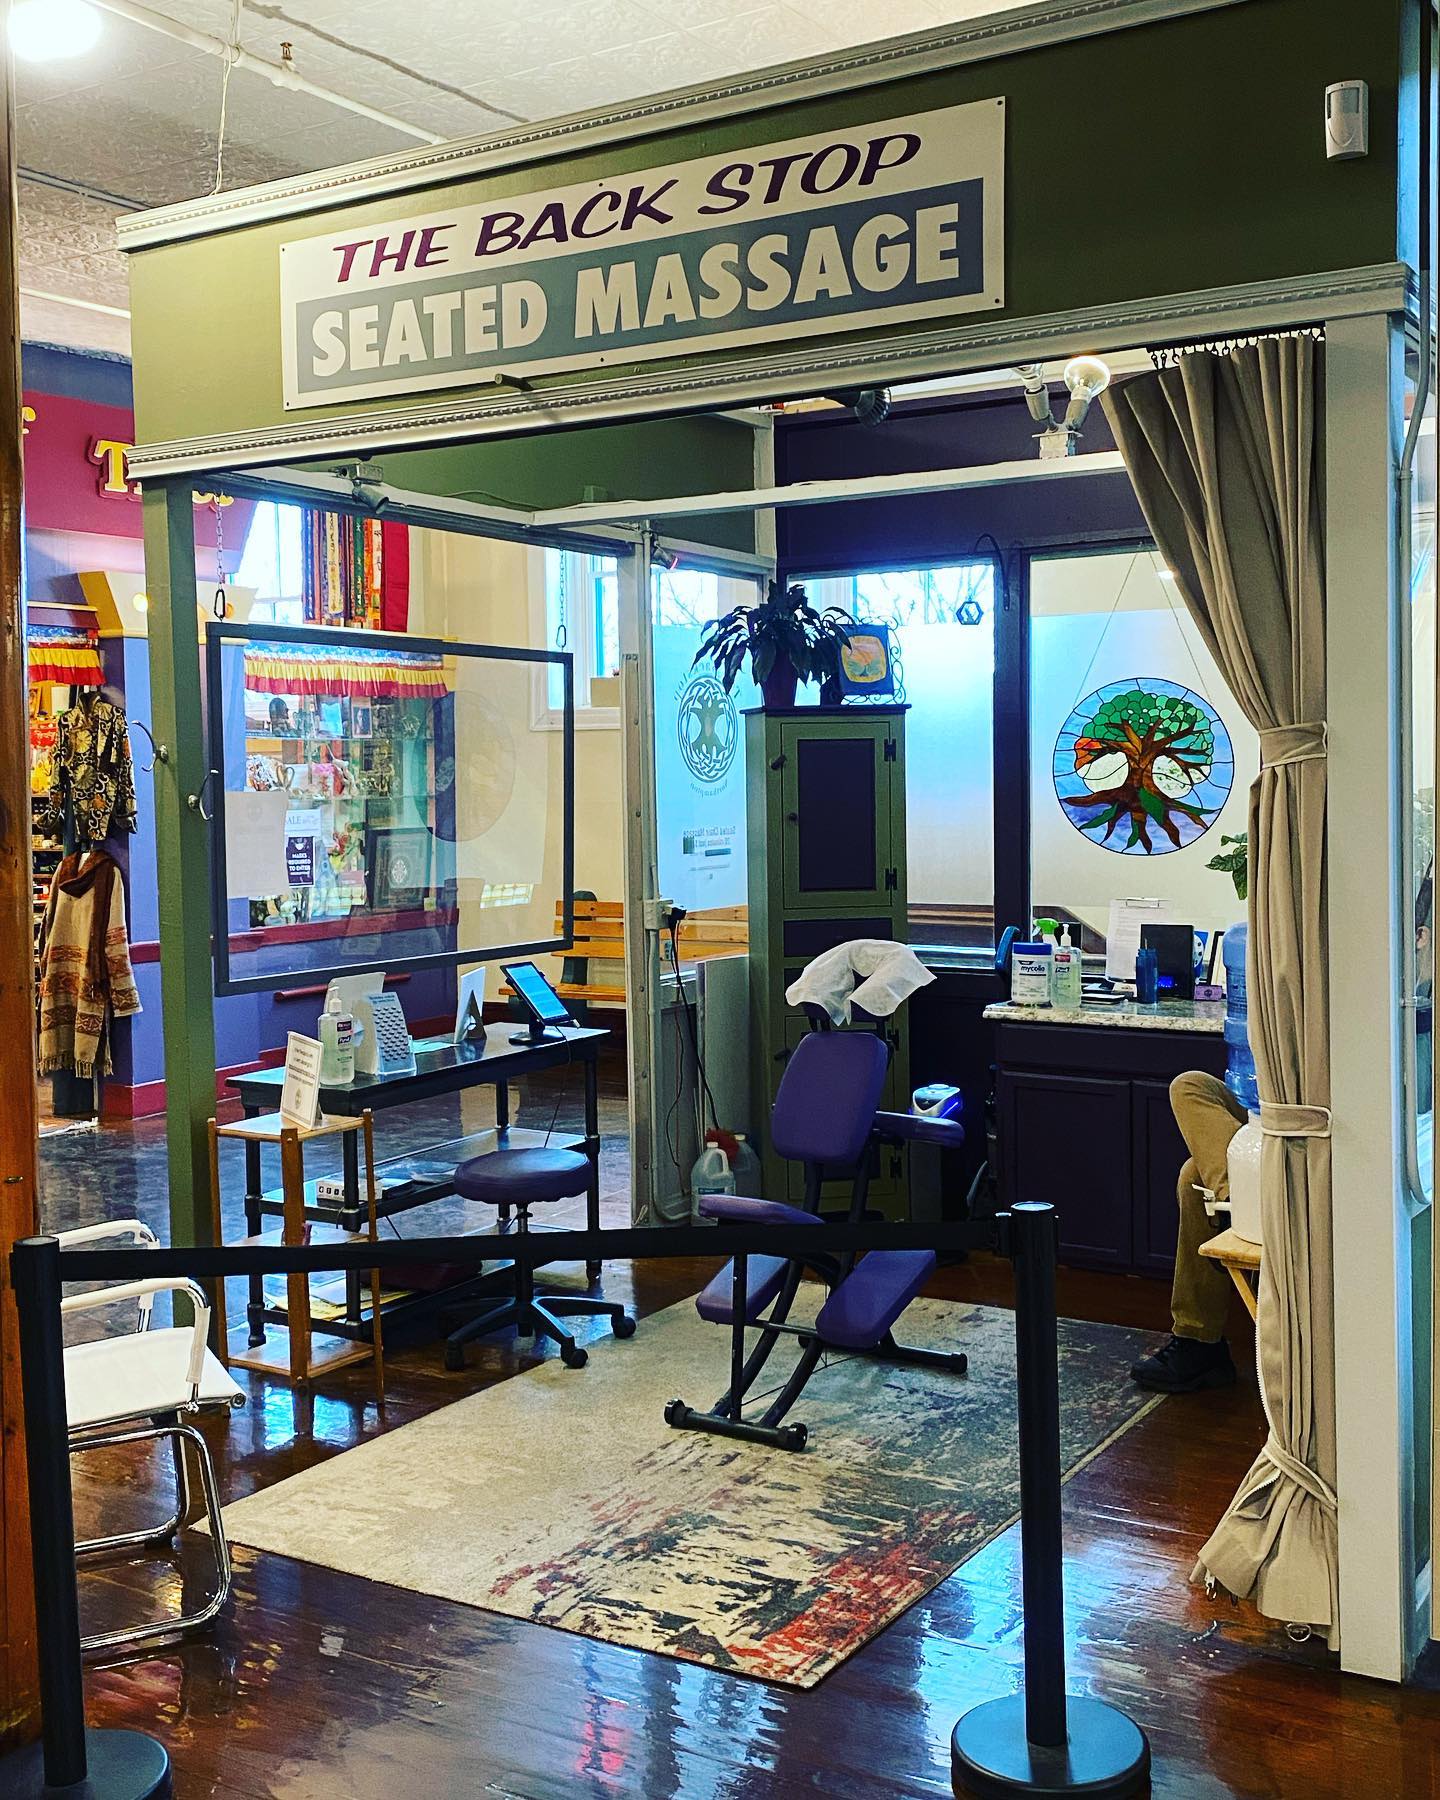 The BackStop in Northampton MA is the spot for a midday massage!